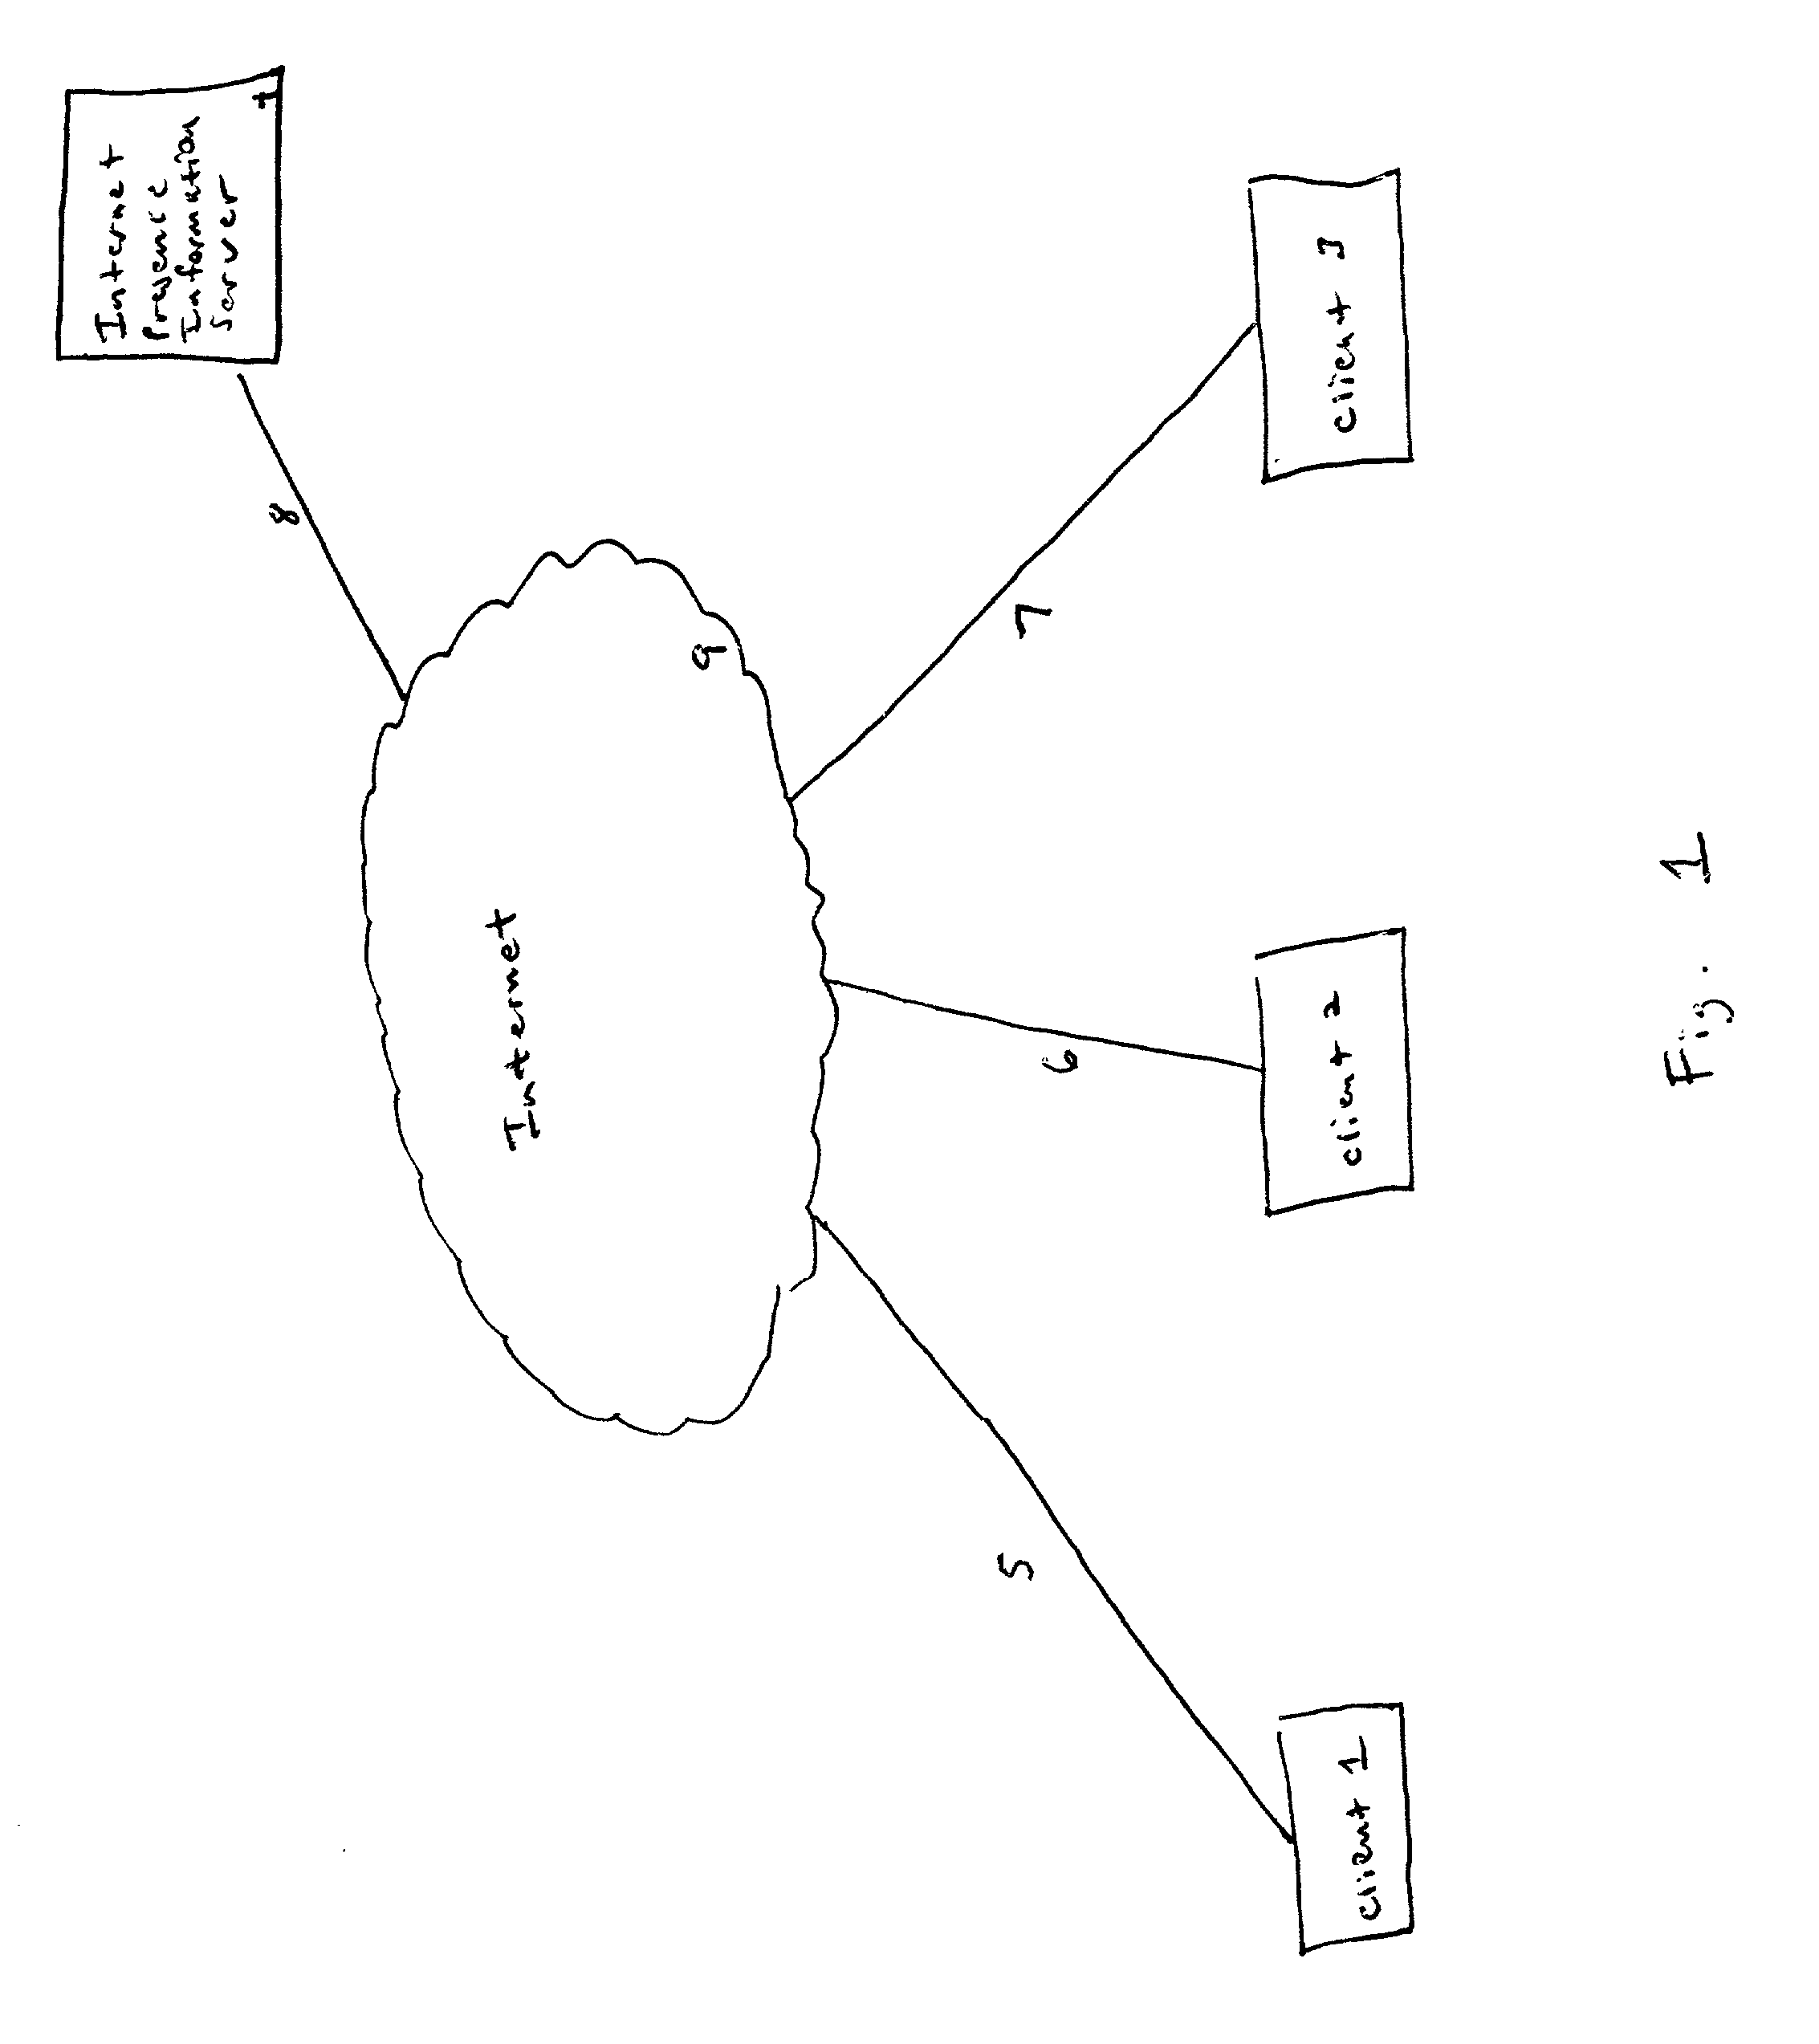 Method for distributing and maintaining network presence information